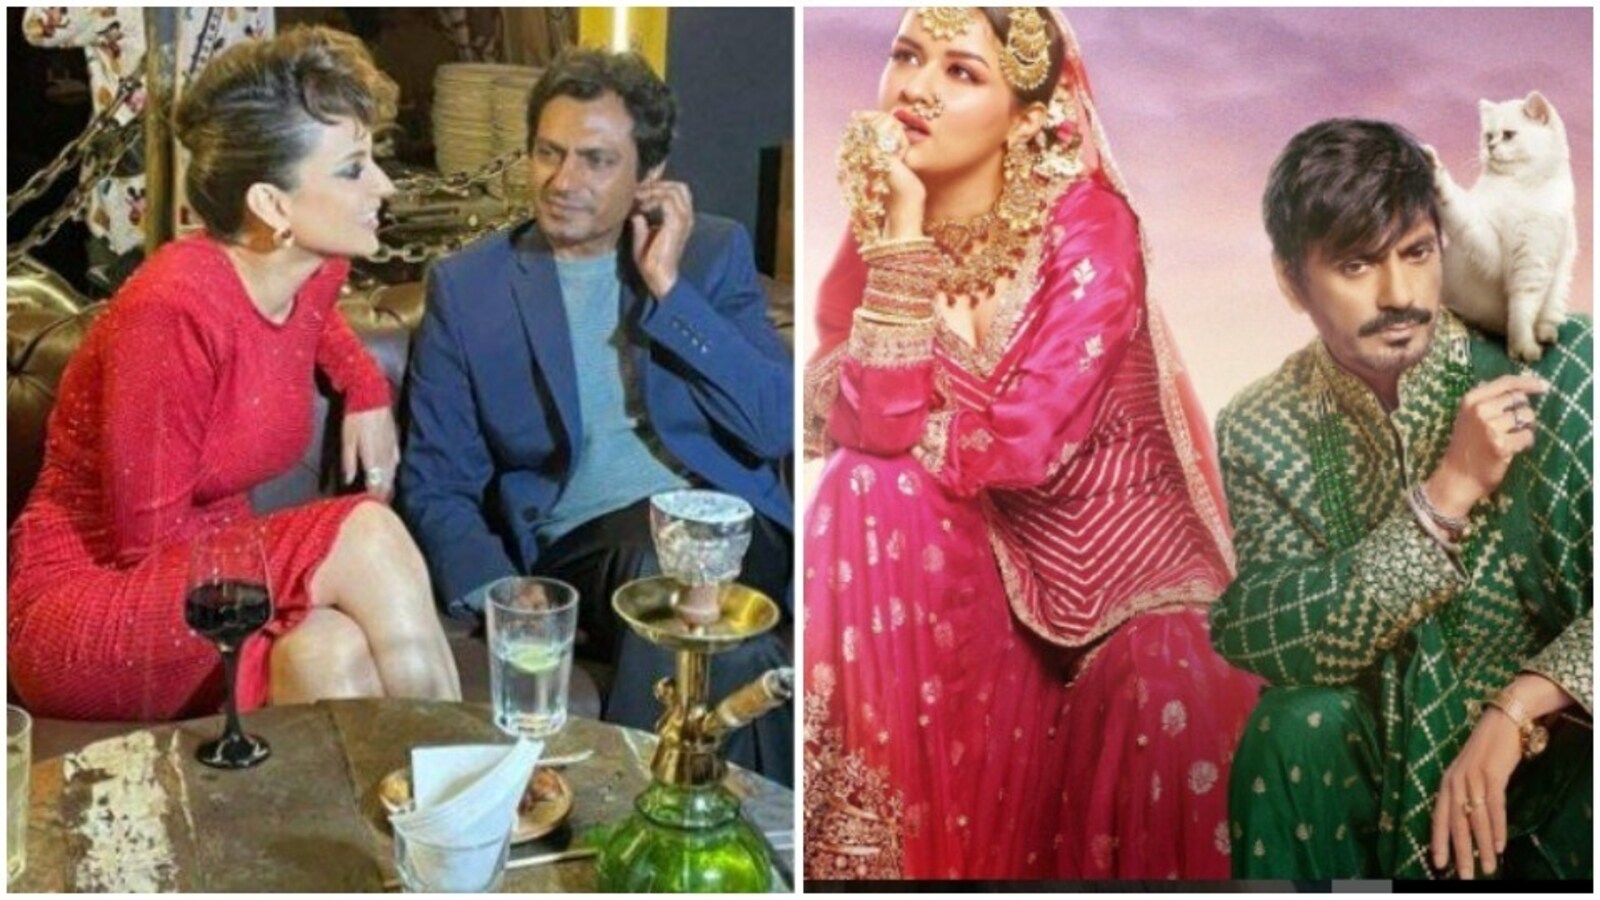 Nawazuddin Siddiqui reacts to rumours that Kangana Ranaut is difficult to work with